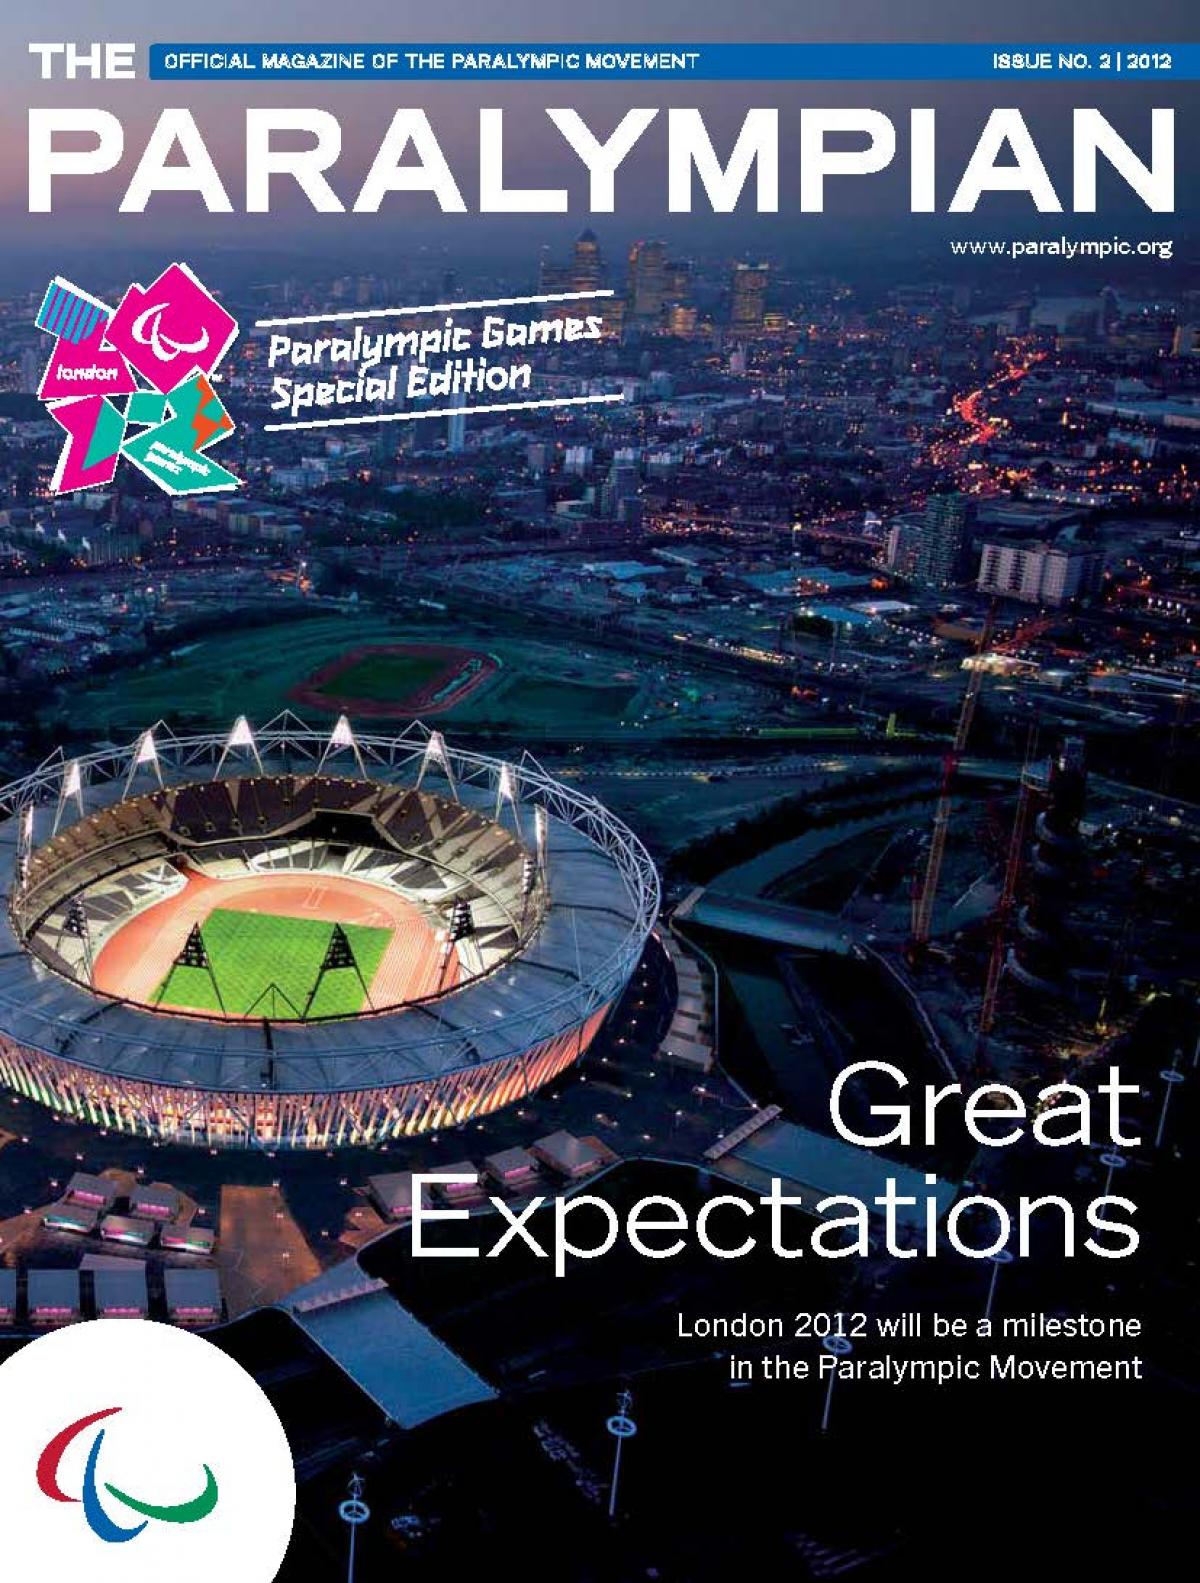 Cover photo of the magazine Paralympian showing a general aerial view of the Olympic Stadium in London with the text: Great Expectations, London 2012 will be a milestone in the Paralympic Movement.